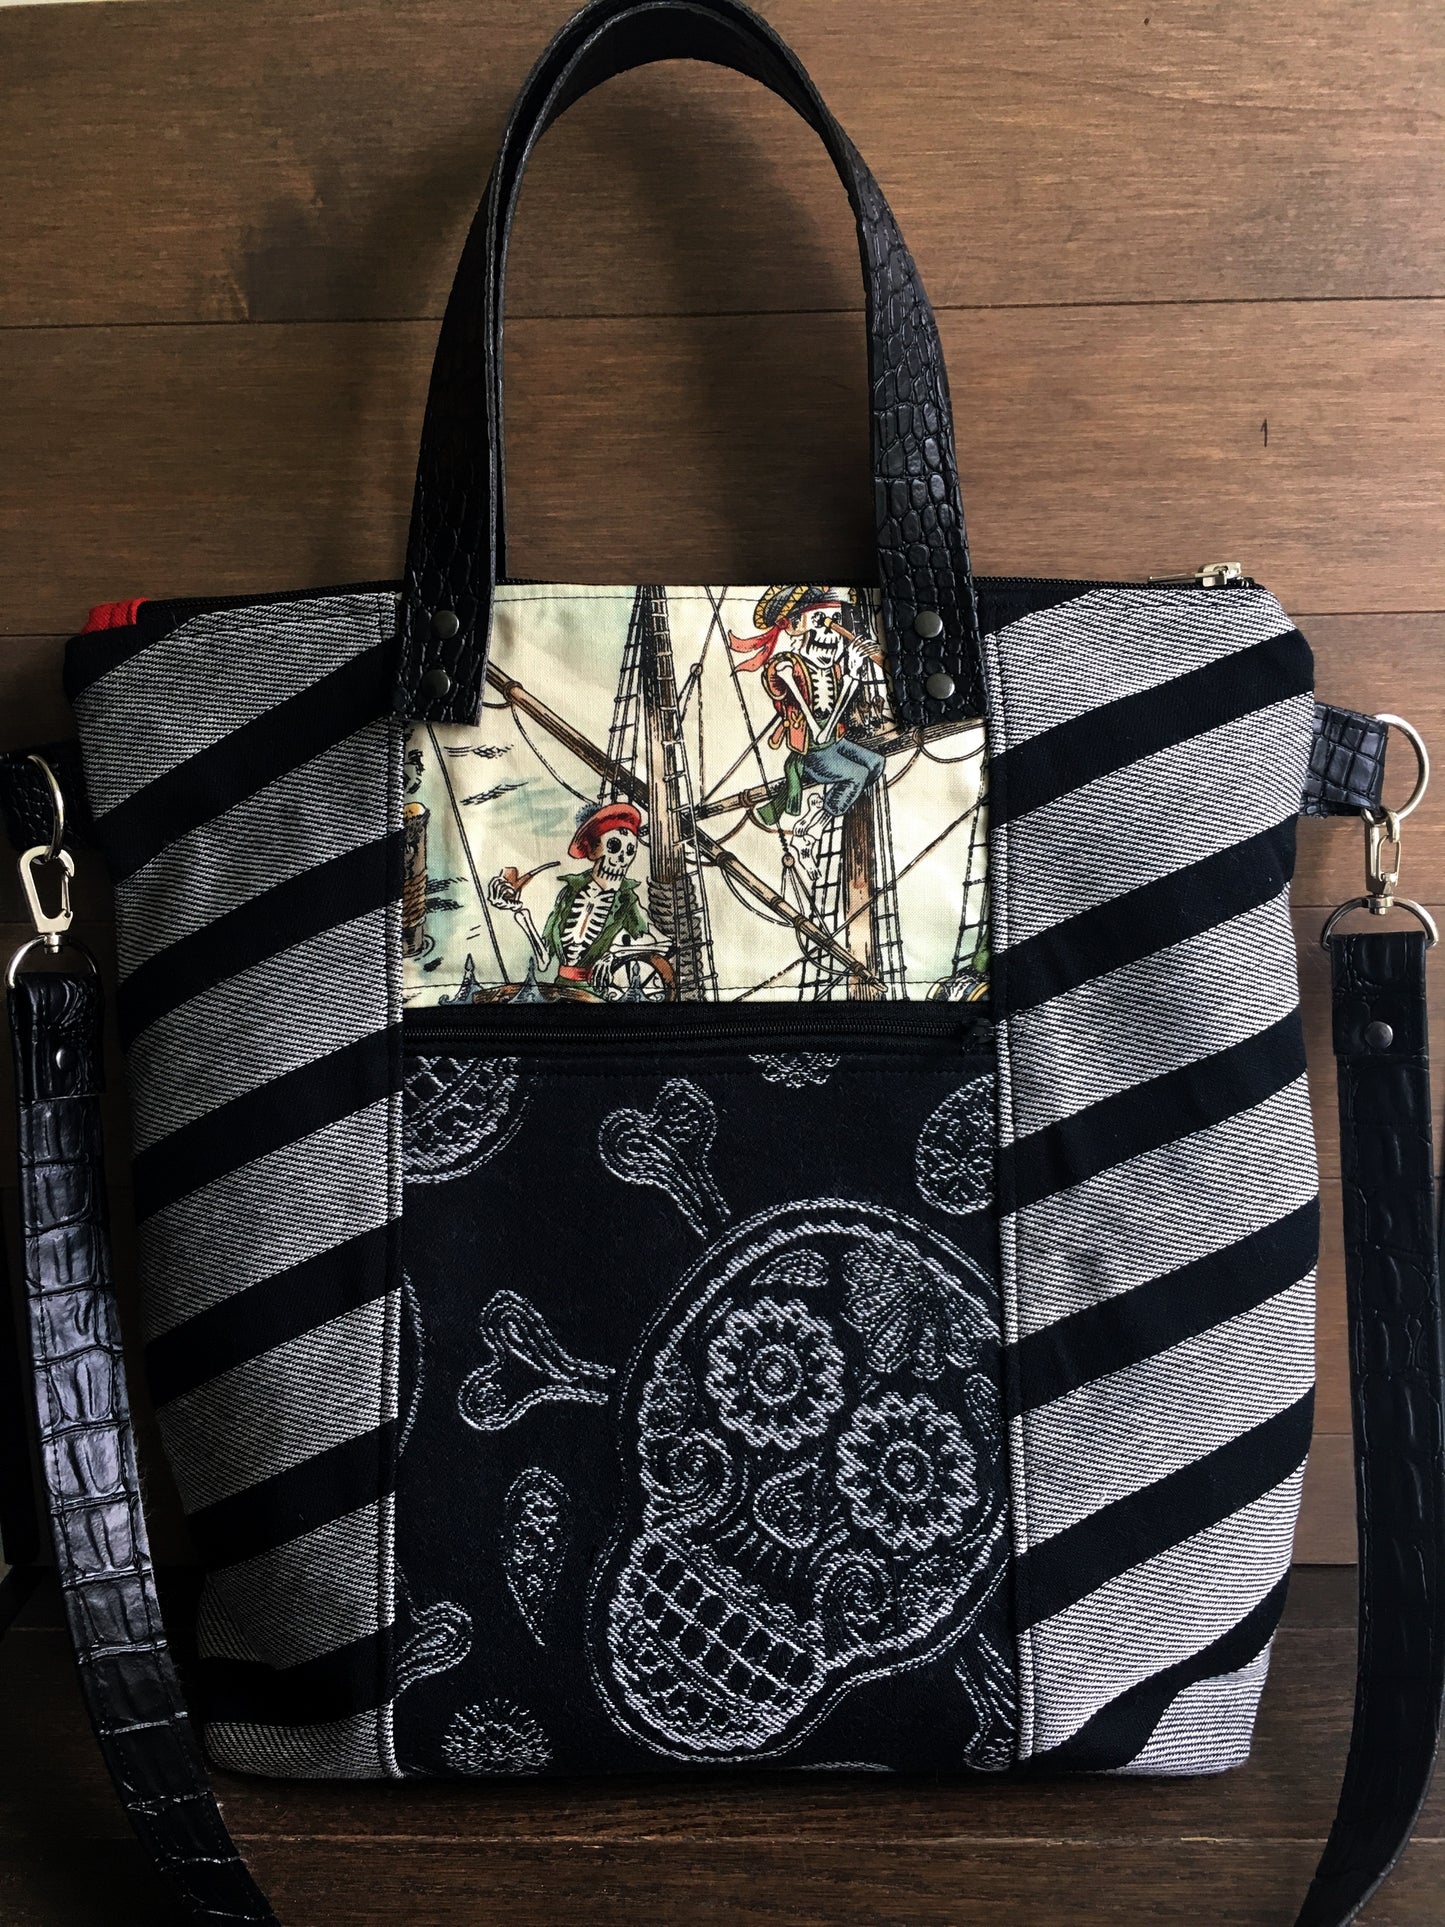 Yarr! Zipper Top Tote Bag with Pockets!